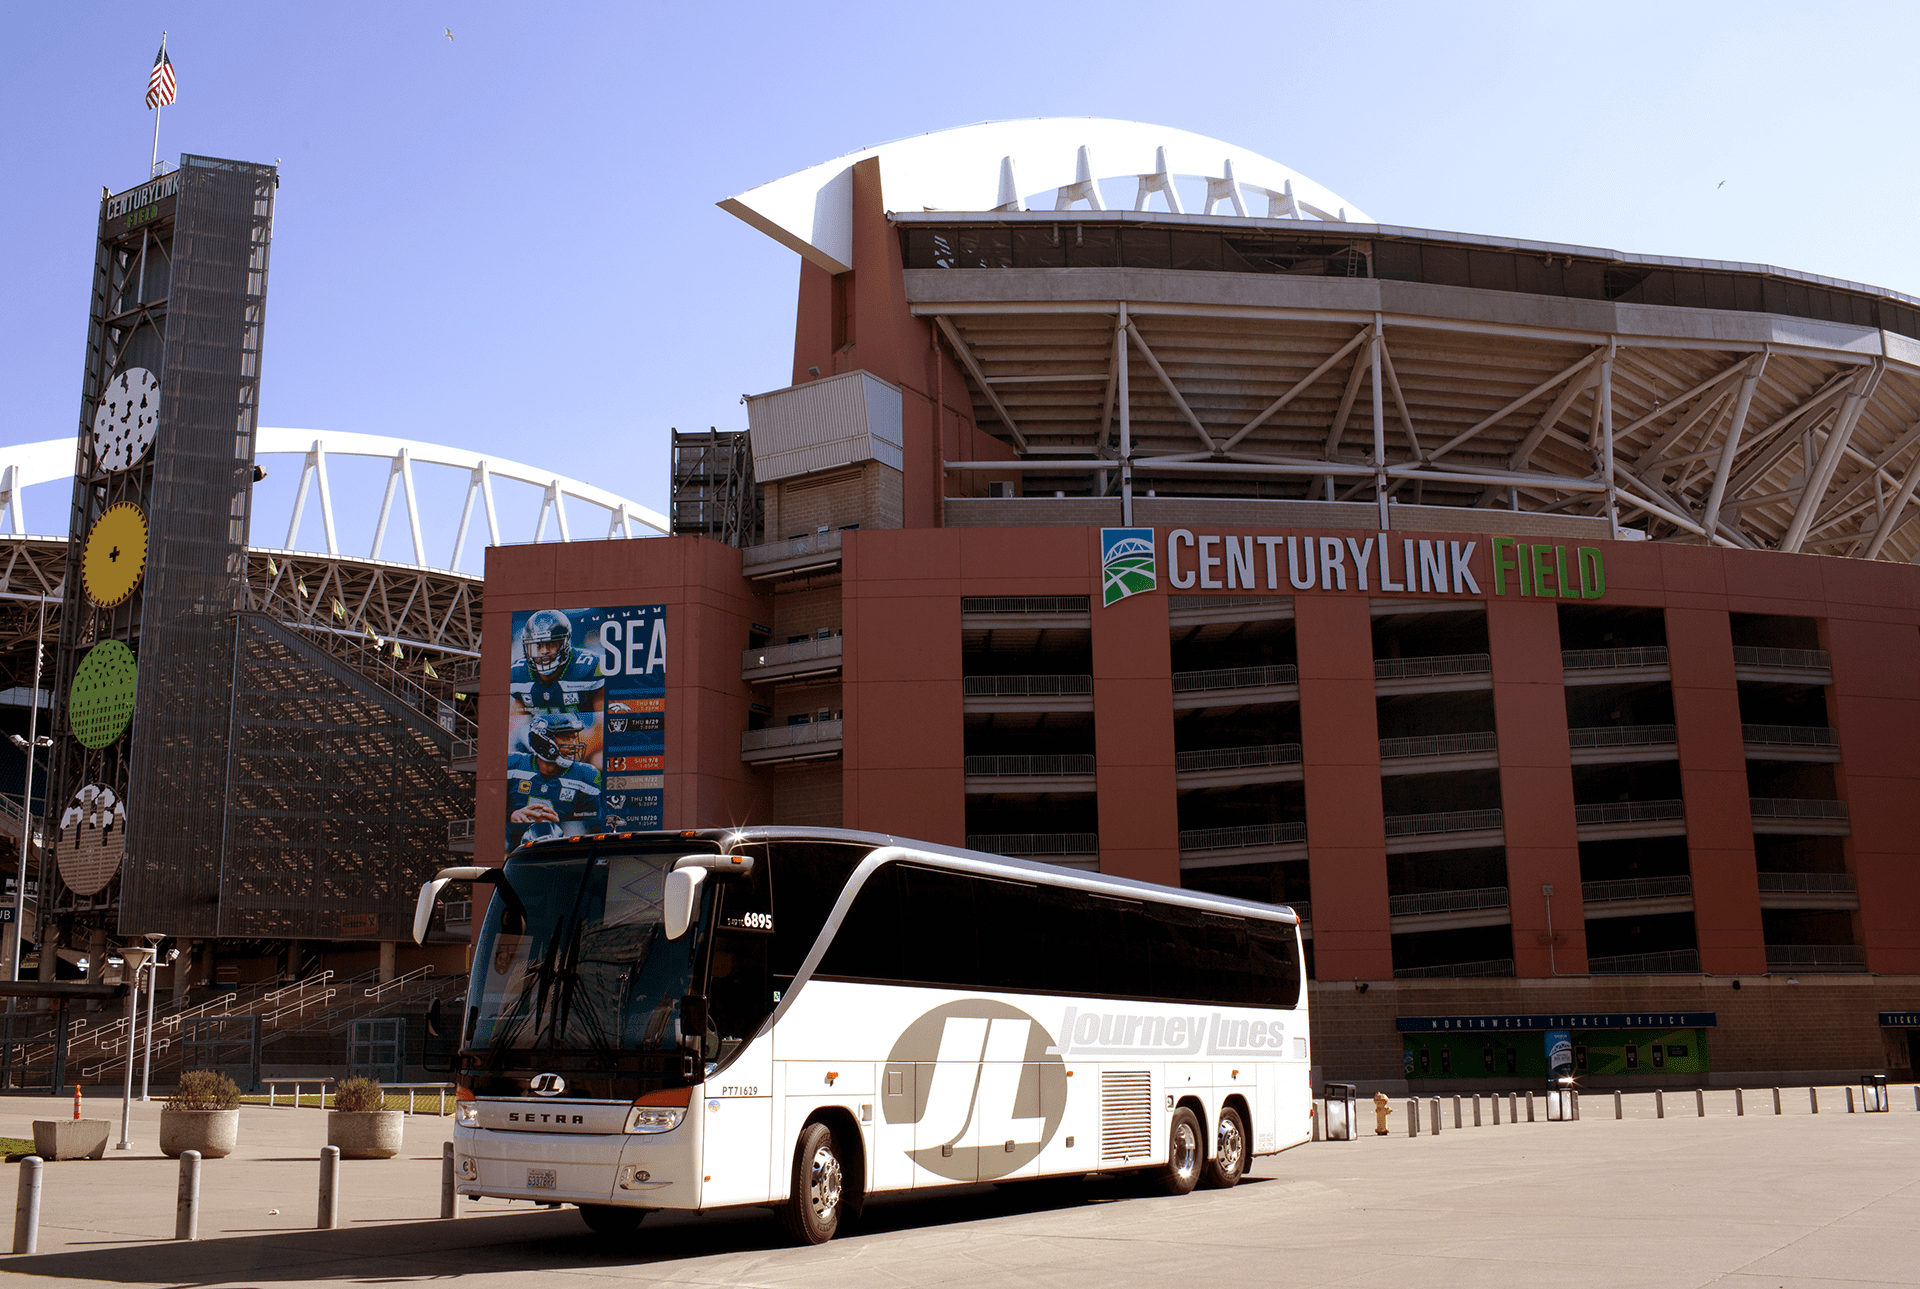 Journey Lines Charter Bus parked in front of CenturyLink Field Building